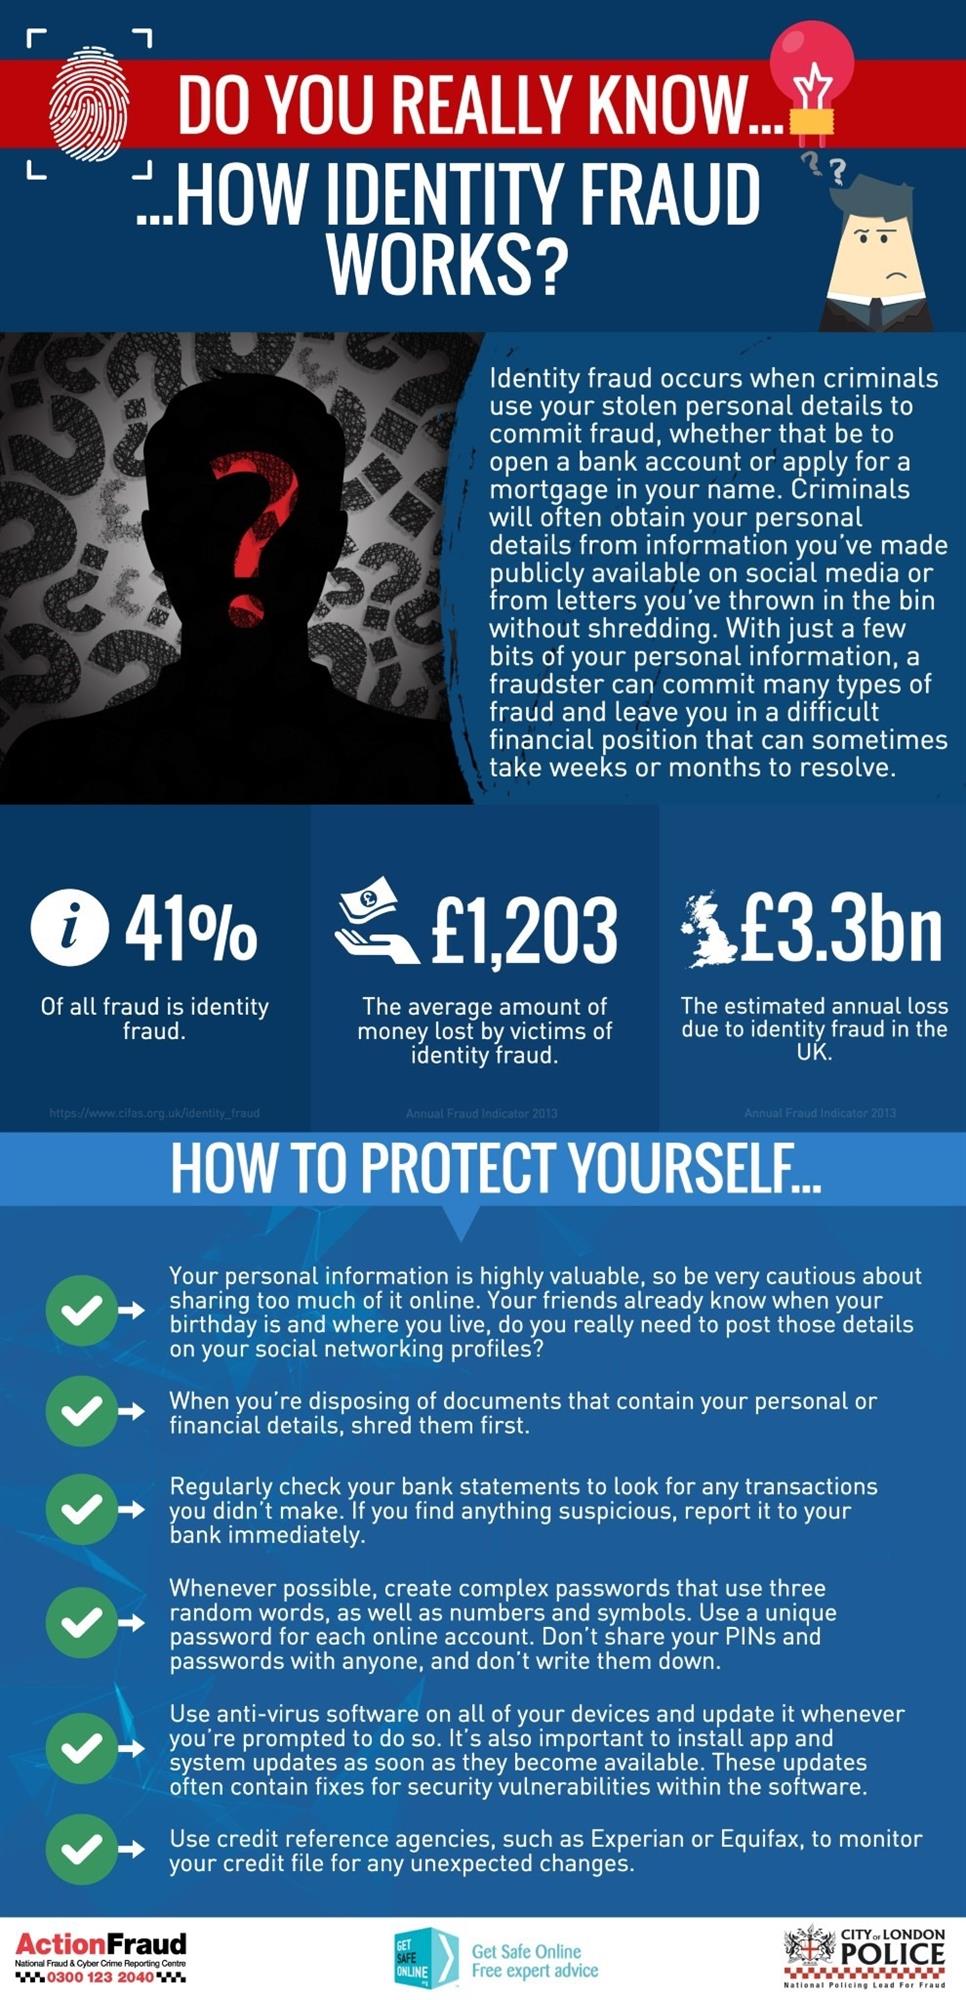 Identity Fraud_Do you really know_Infographic.jpg